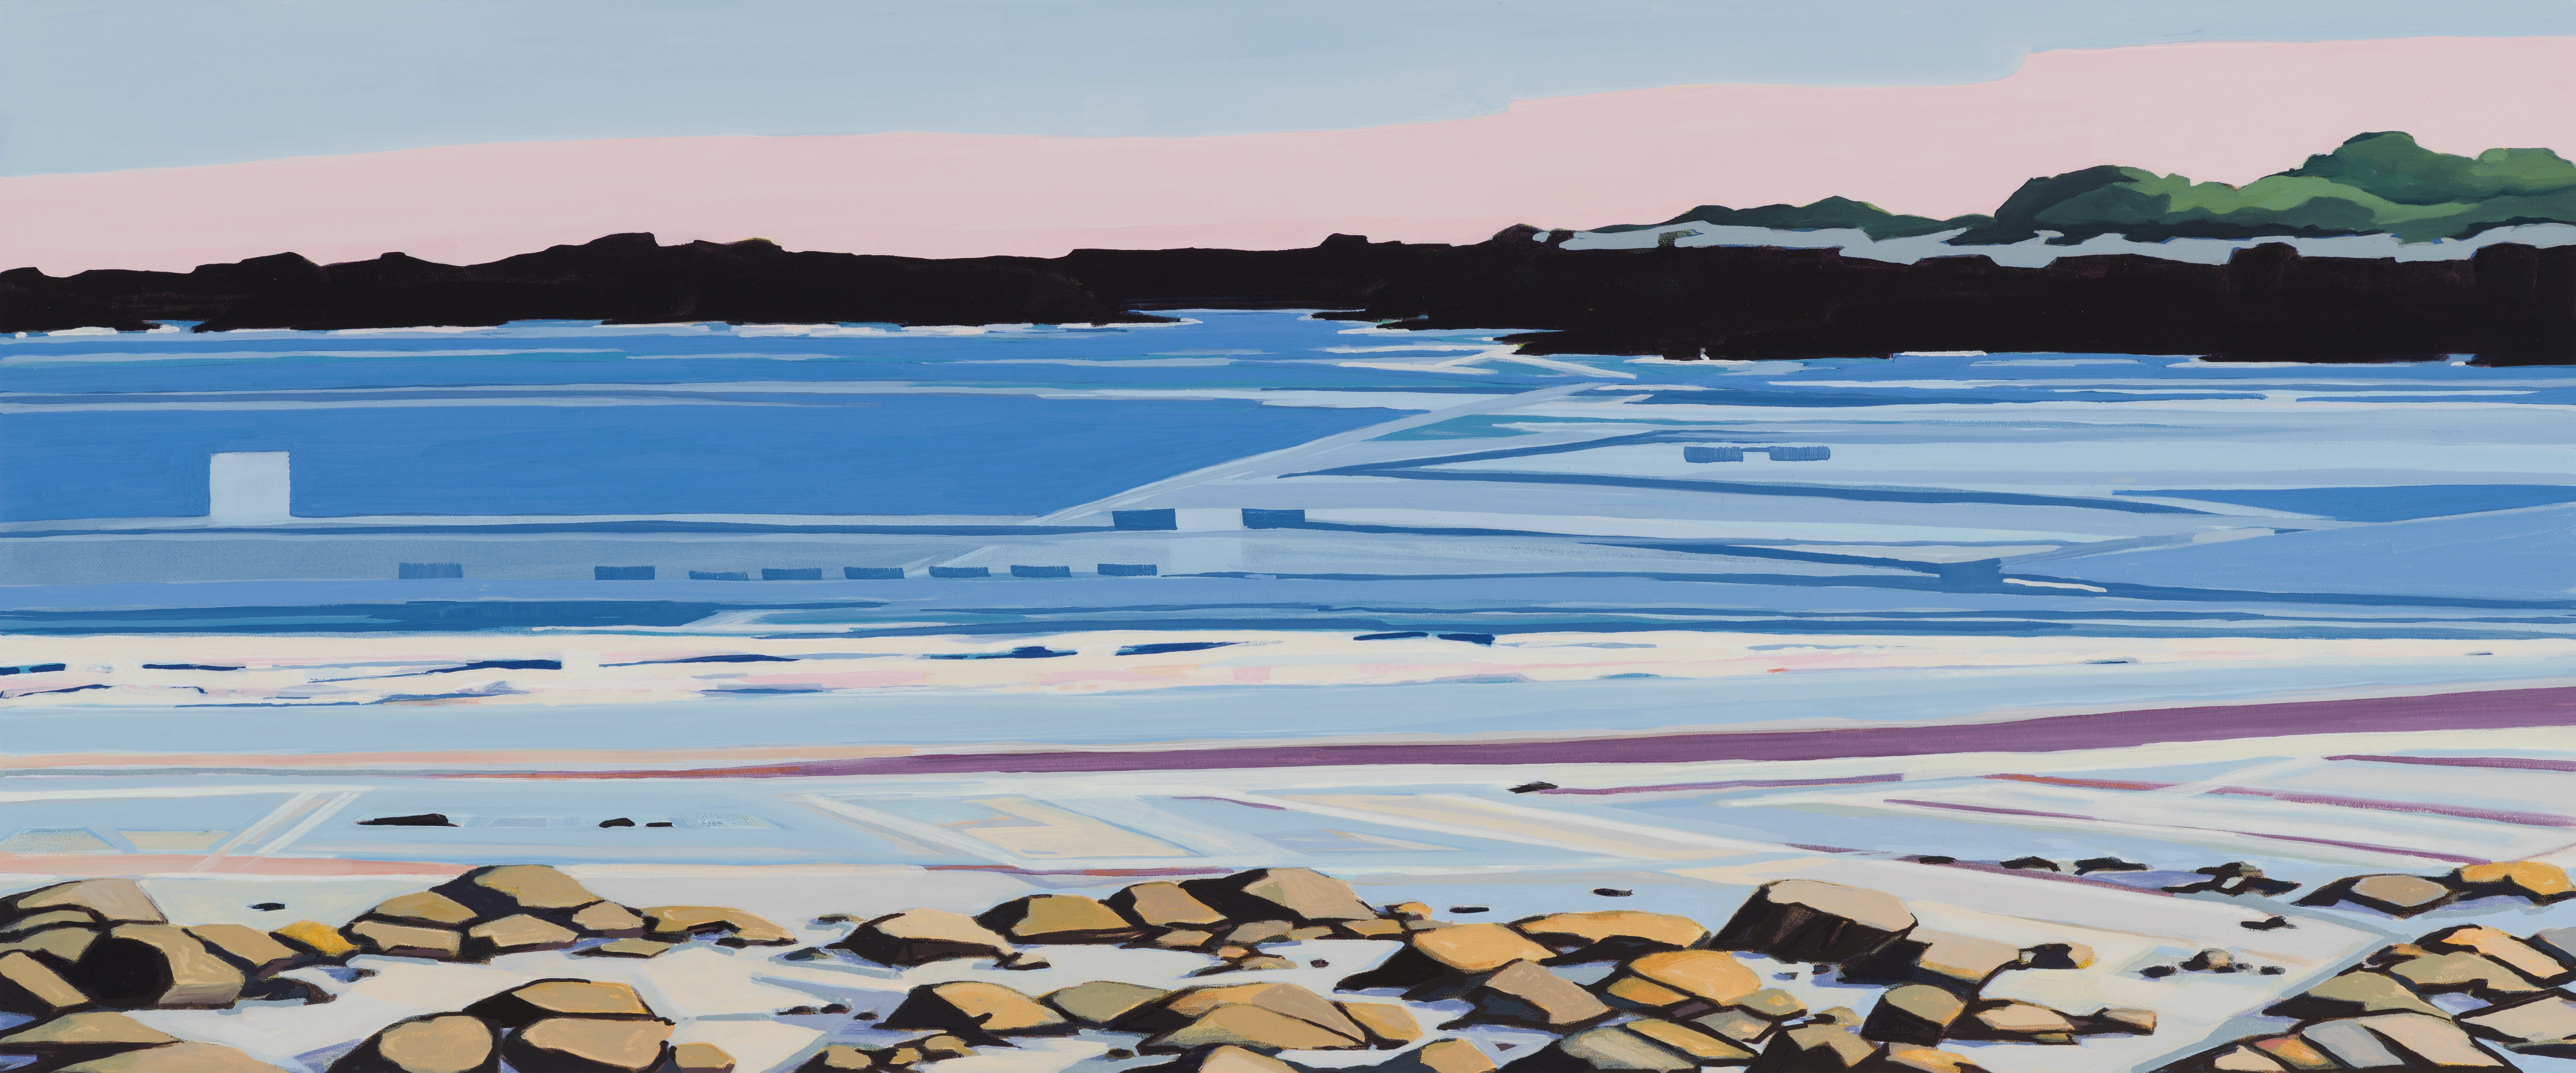 Reveal, 9/29/19, 18:17, 43.536670, -70.313247, 2021, oil on canvas, 15 x 36 inches